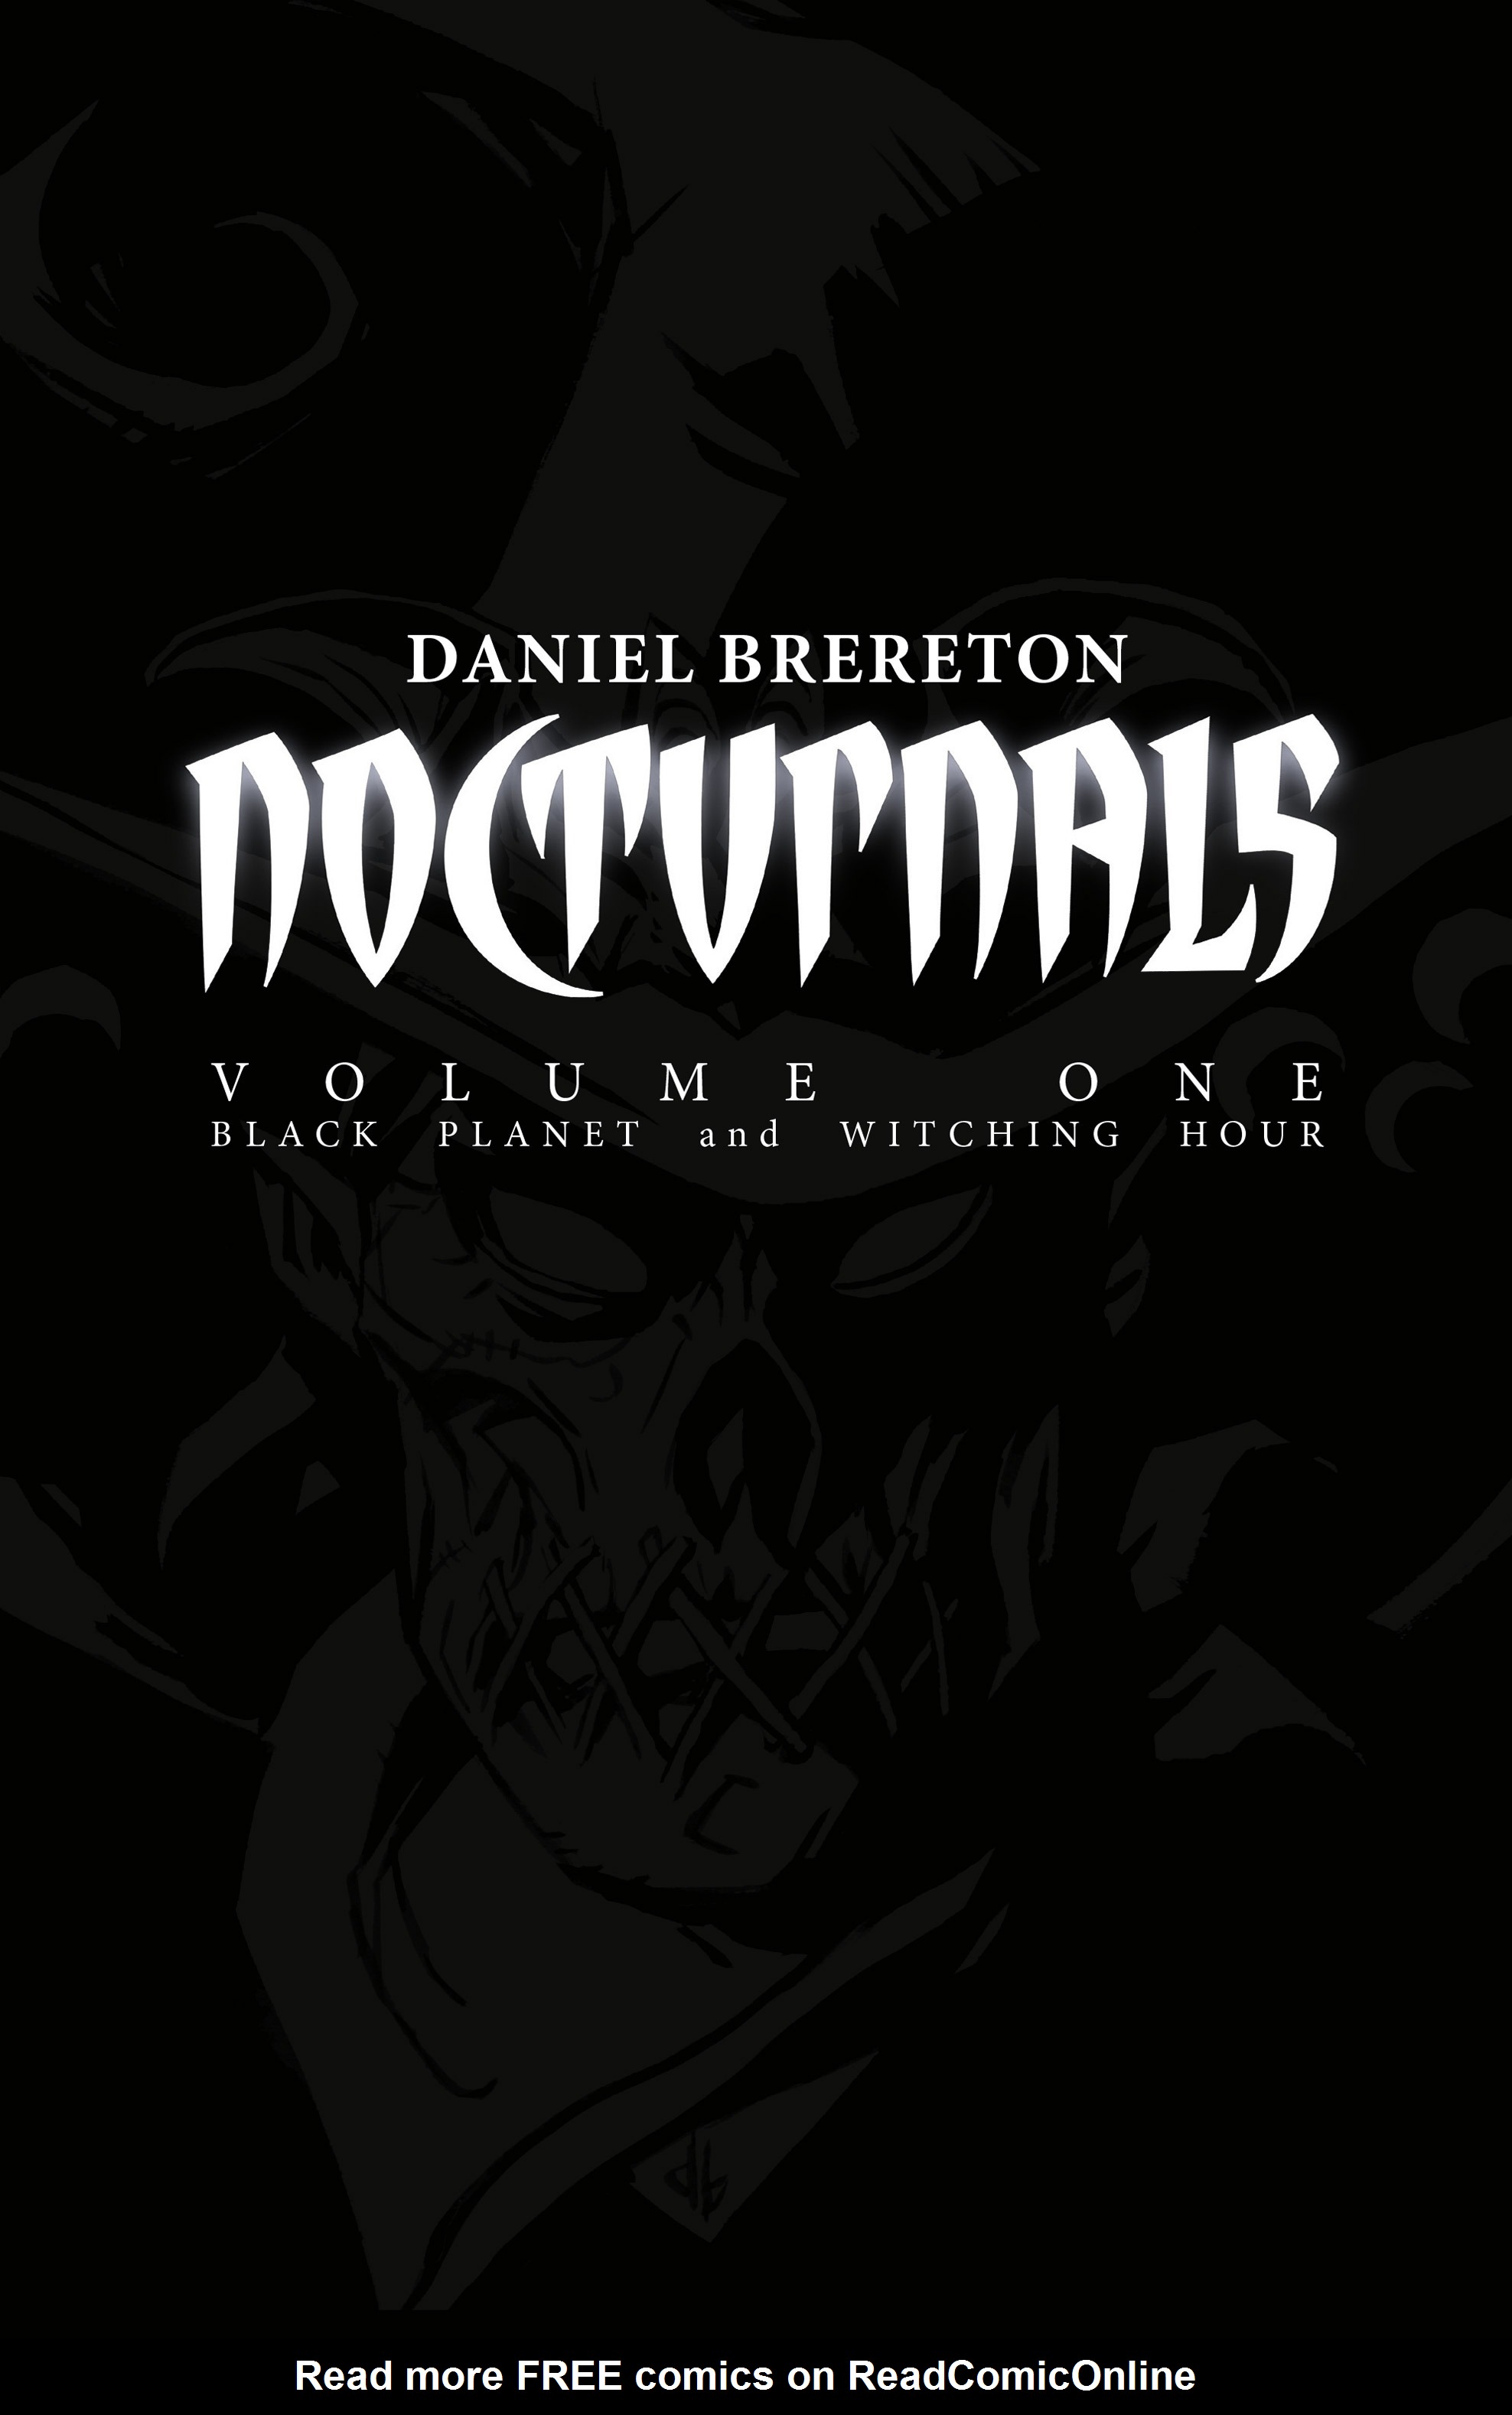 Read online The Nocturnals comic -  Issue # TPB - 4